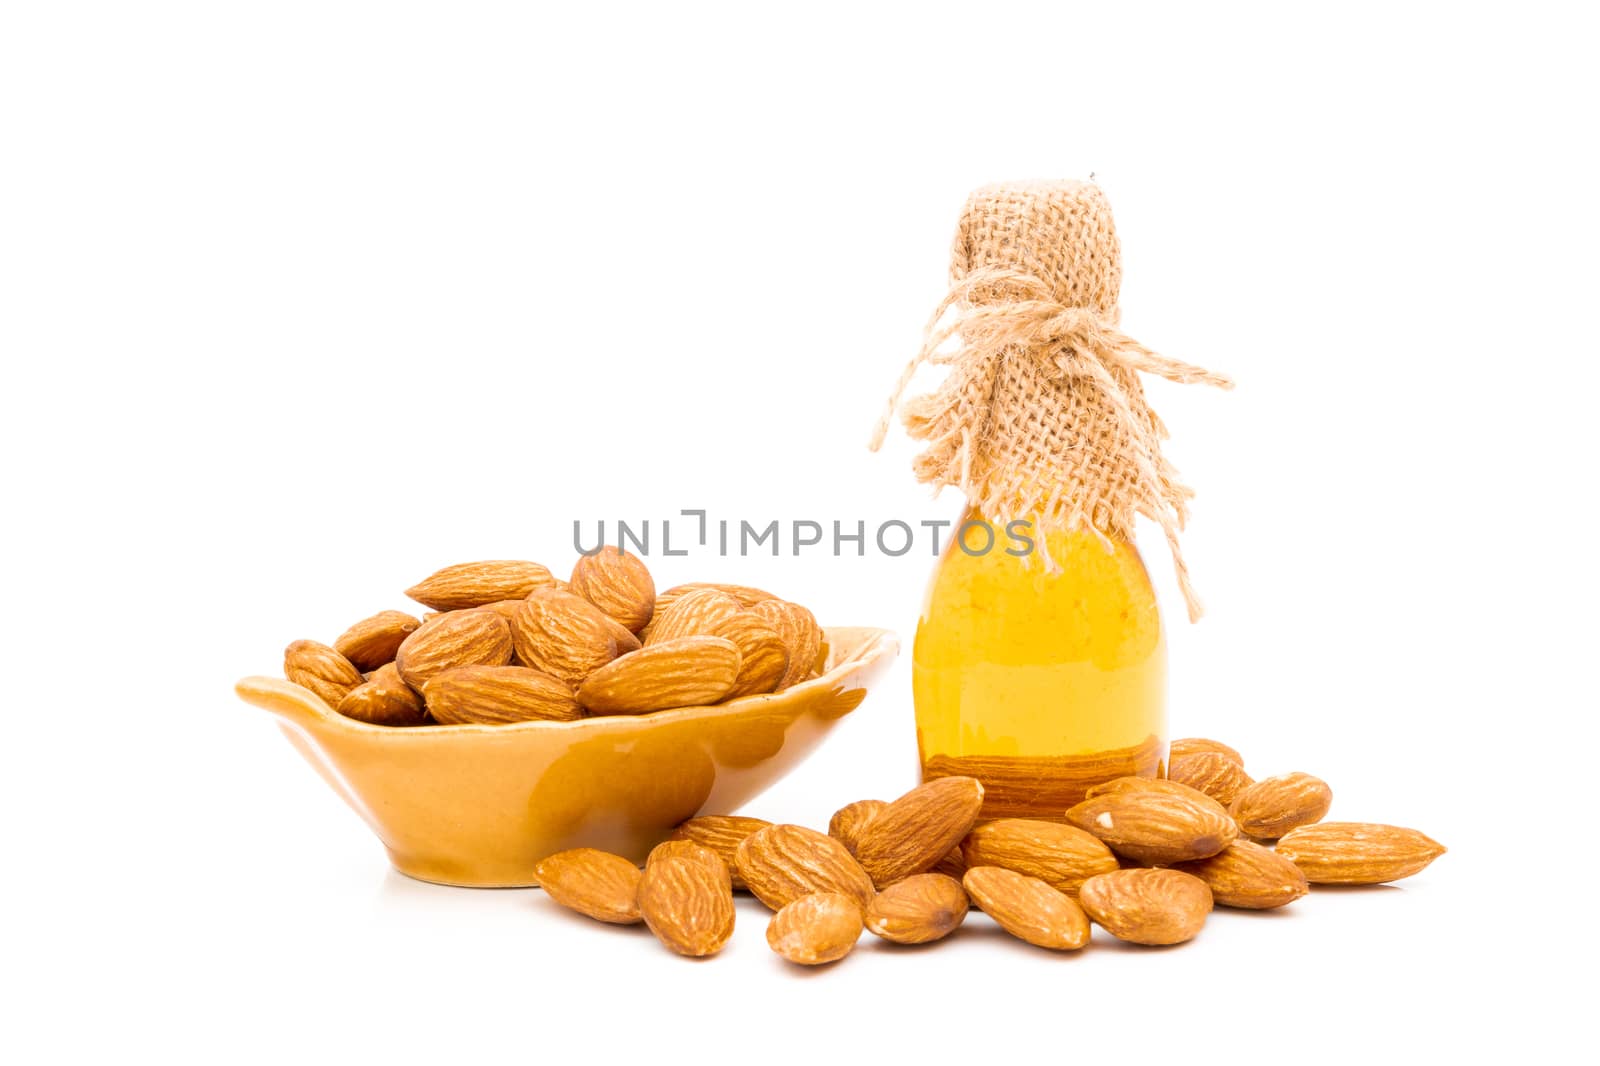 Honey jar and almonds on a white background by sompongtom